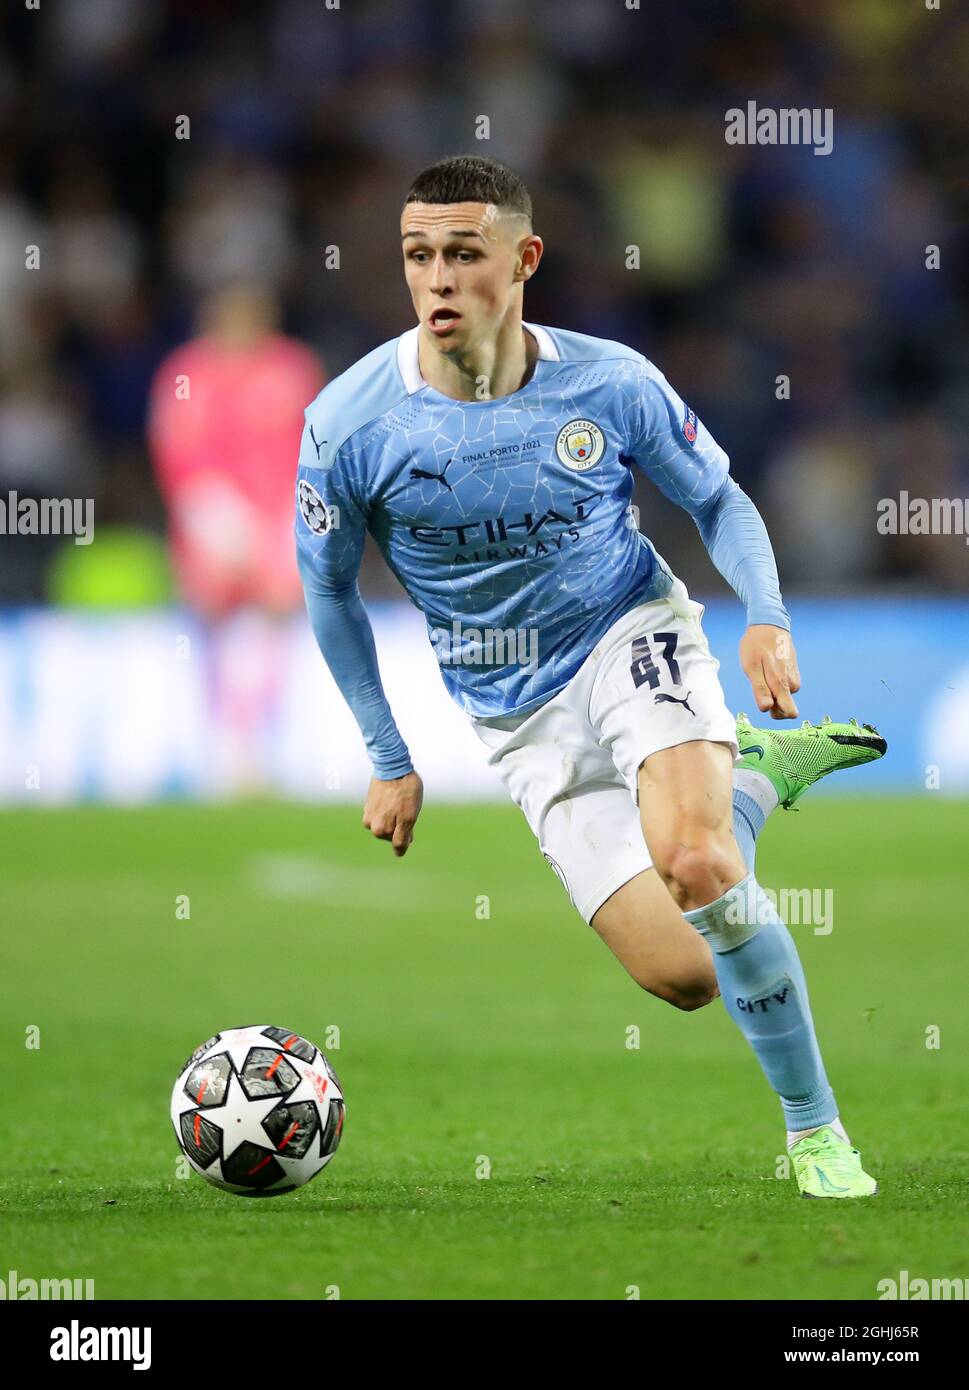 Porto, Portugal, 29th May 2021. Phil Foden of Manchester City during the UEFA Champions League match at the Estadio do Dragao, Porto. Picture credit should read: David Klein / Sportimage via PA Images Stock Photo